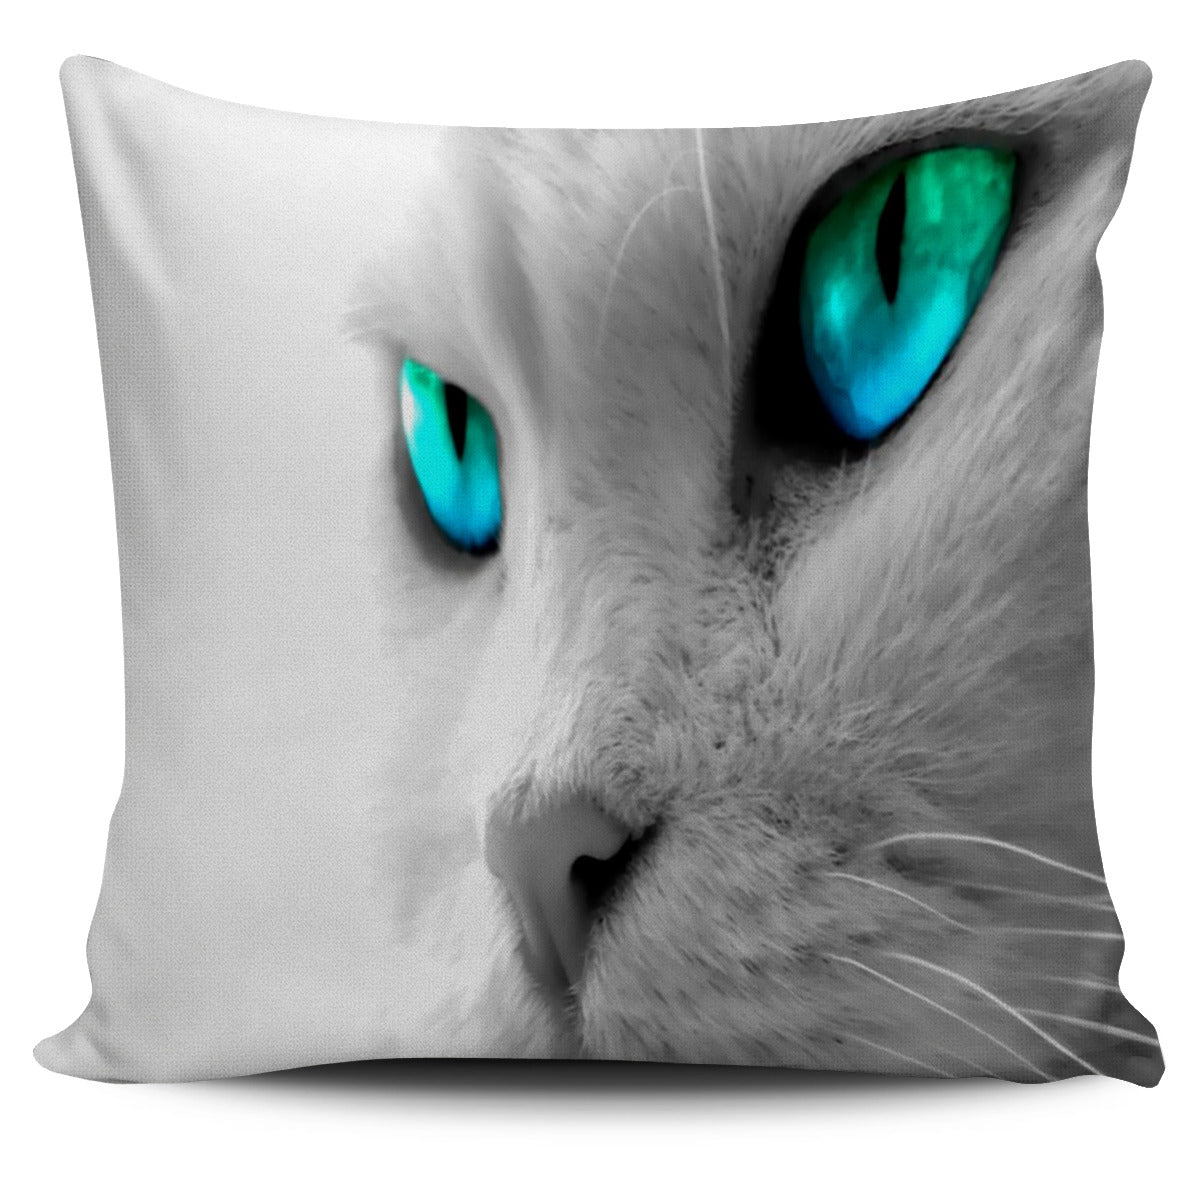 Cat Eyes Pillow Cover